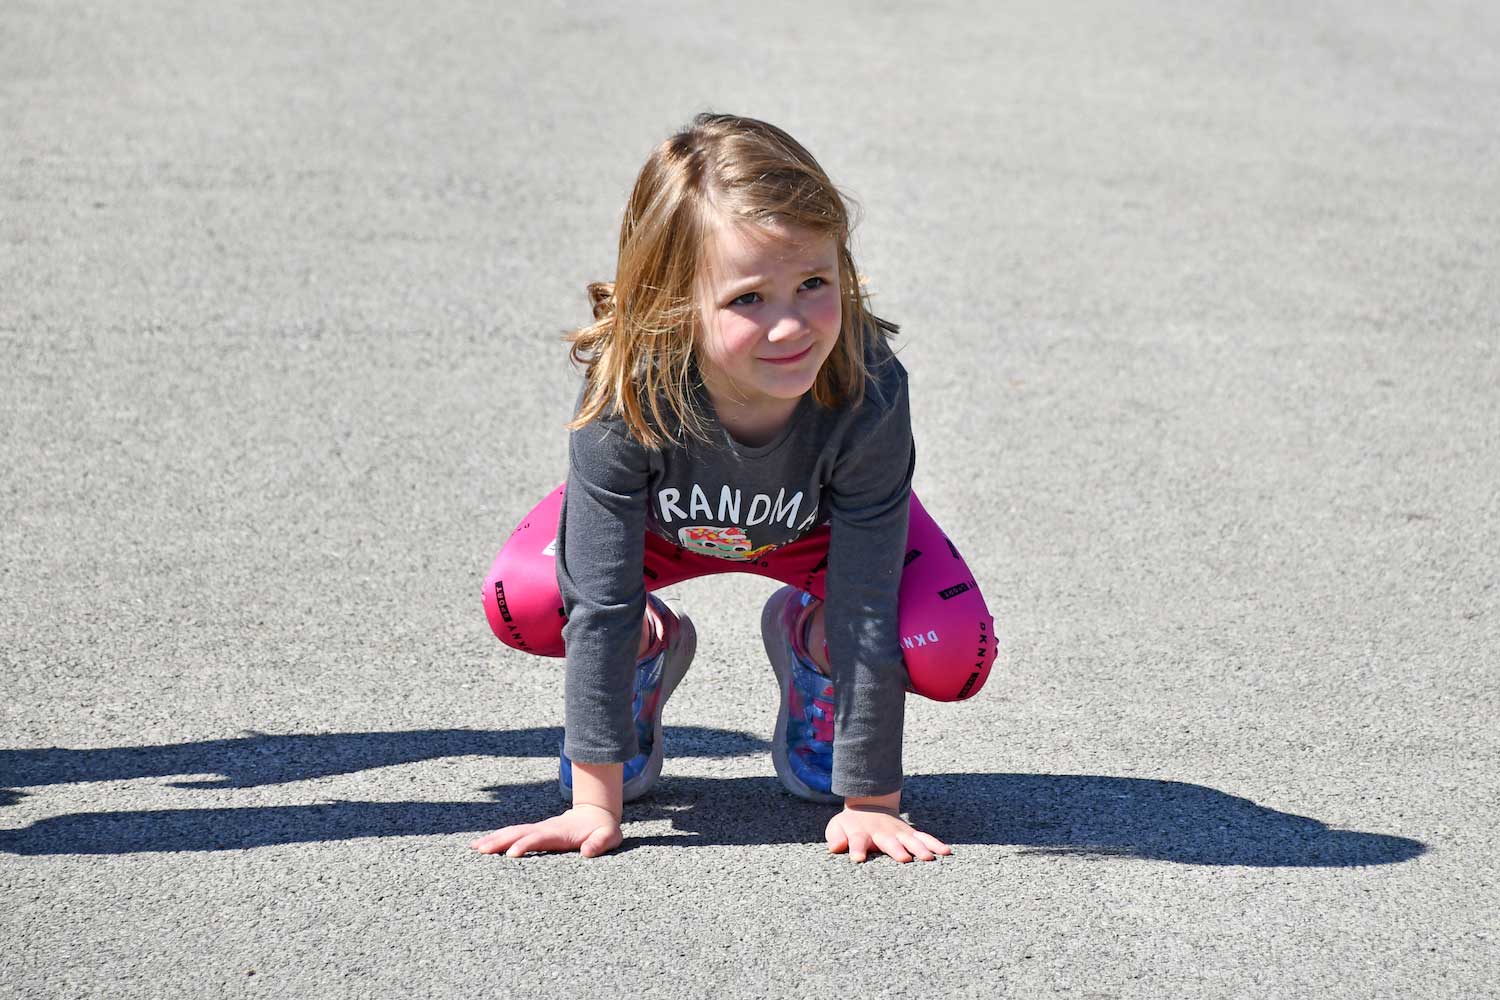 A child crouched down on the pavement ready to leap.